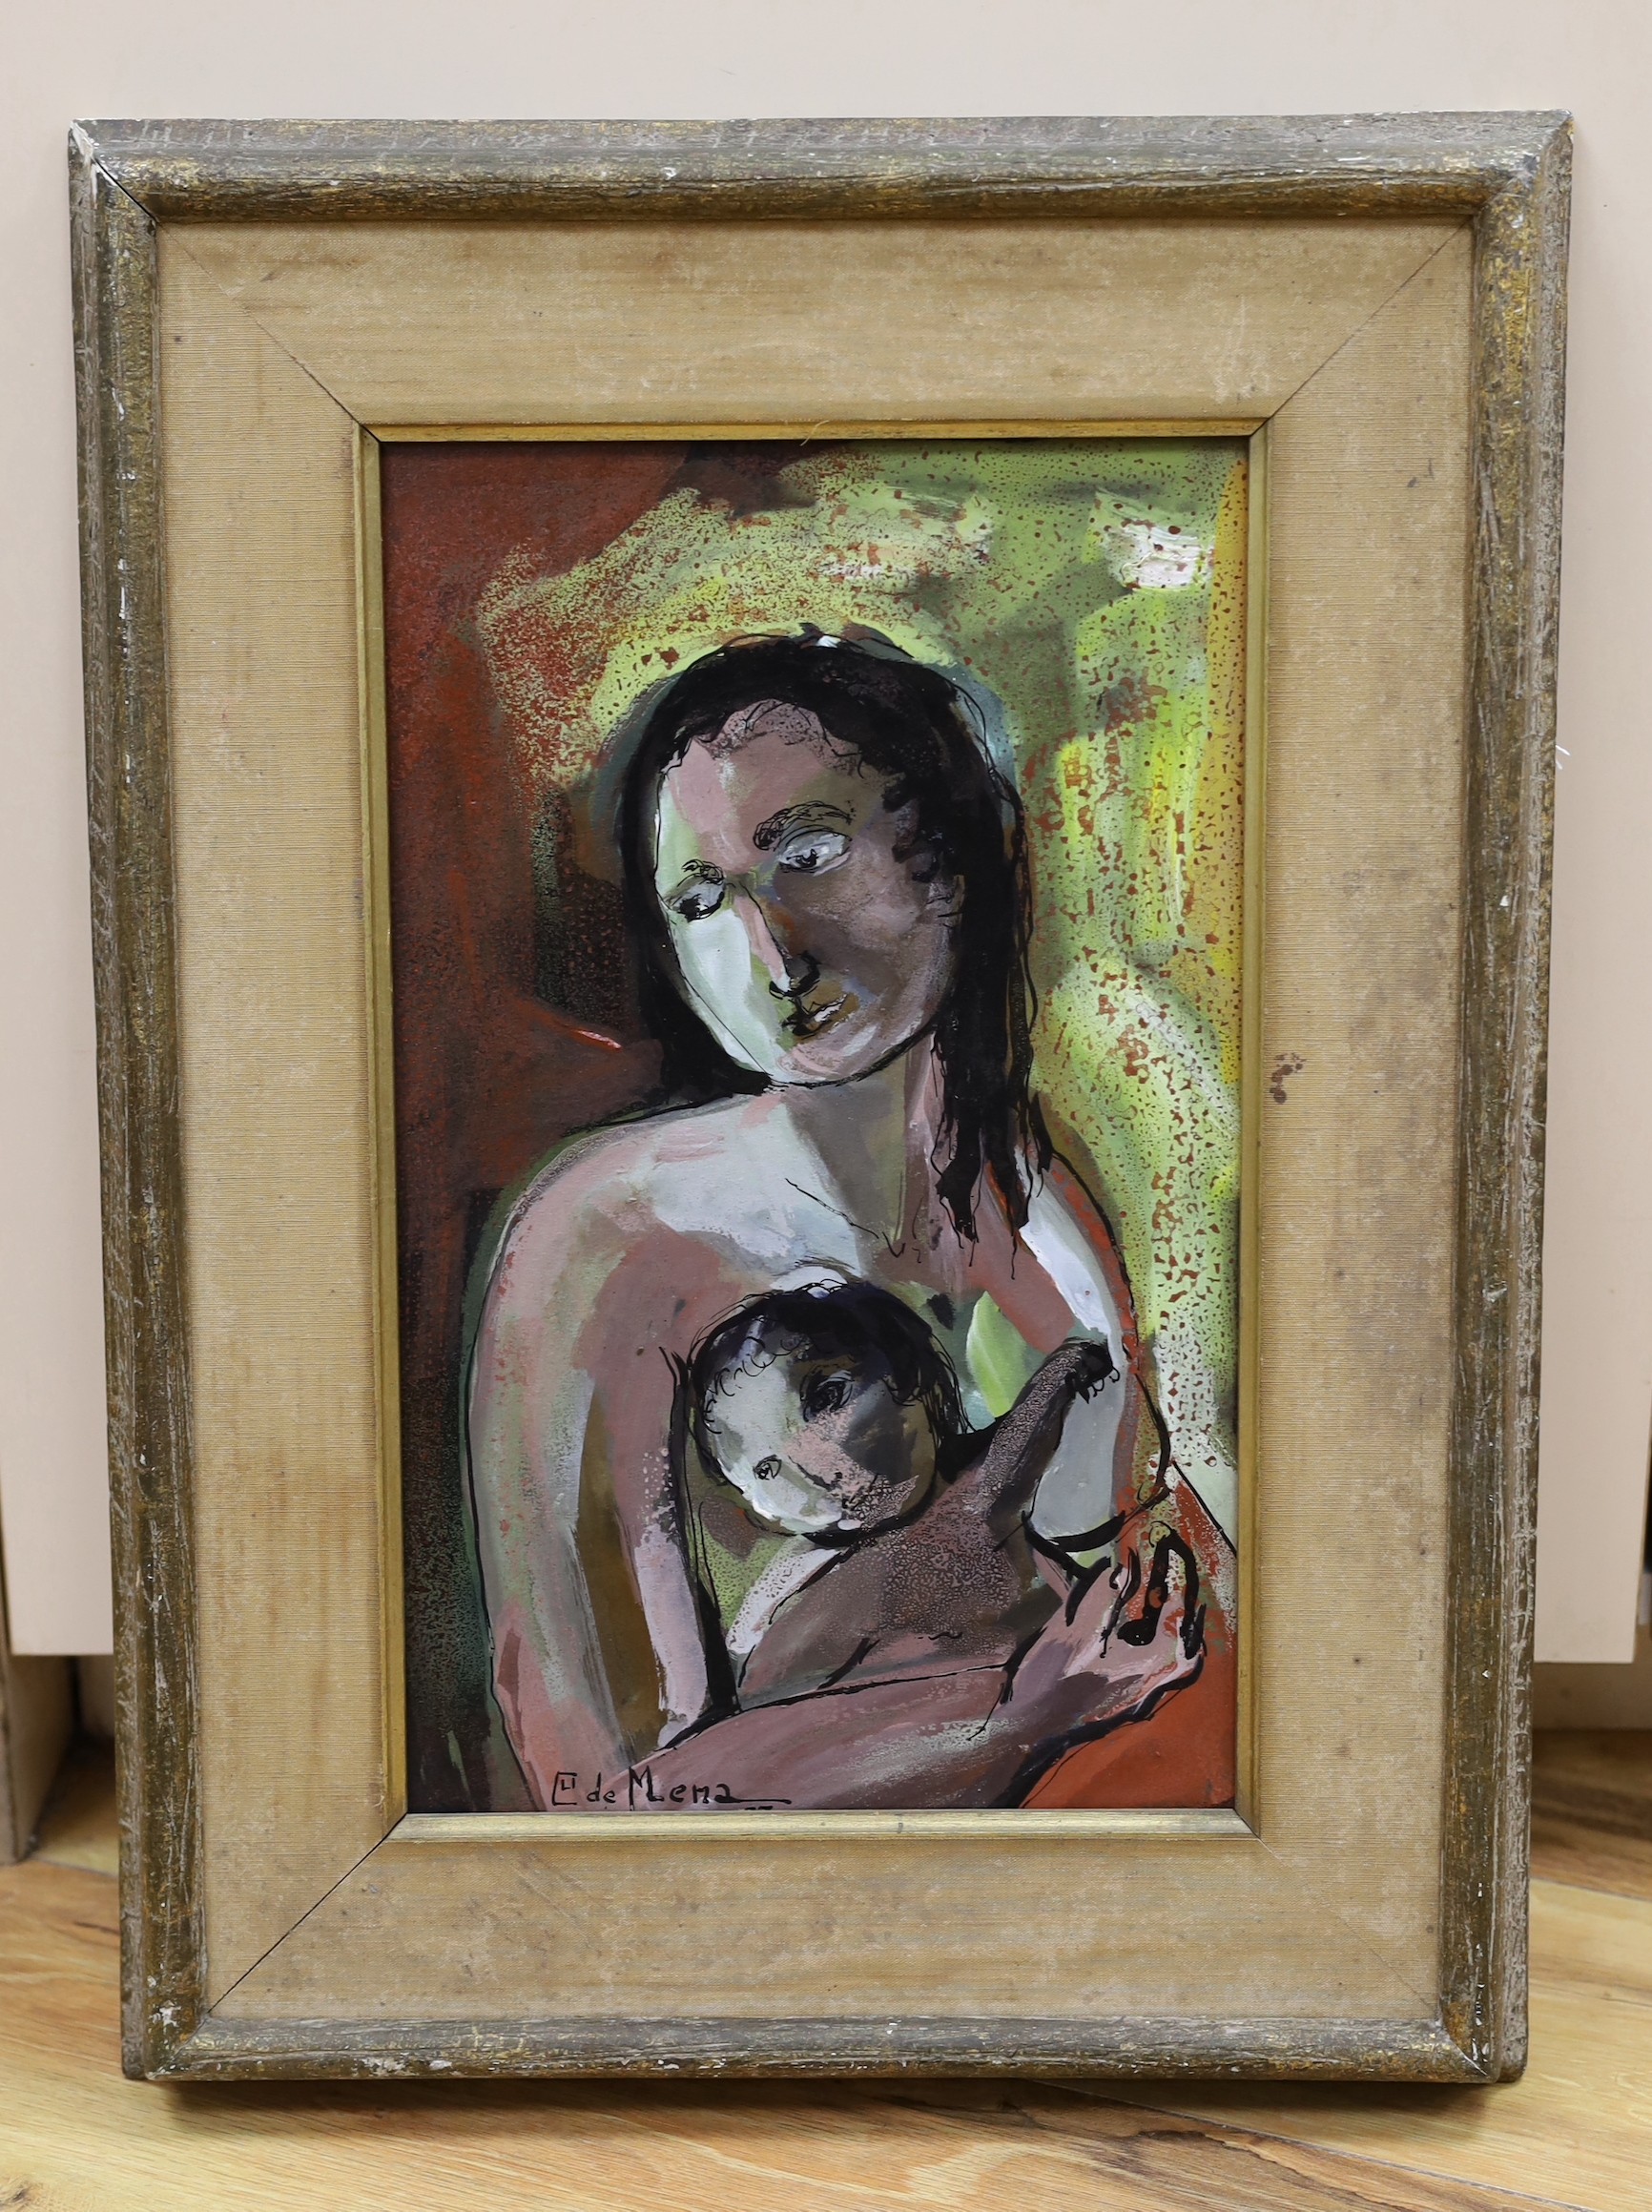 Margarita de Mena, mixed media on card, Mother and child, signed, 38 x 23cm